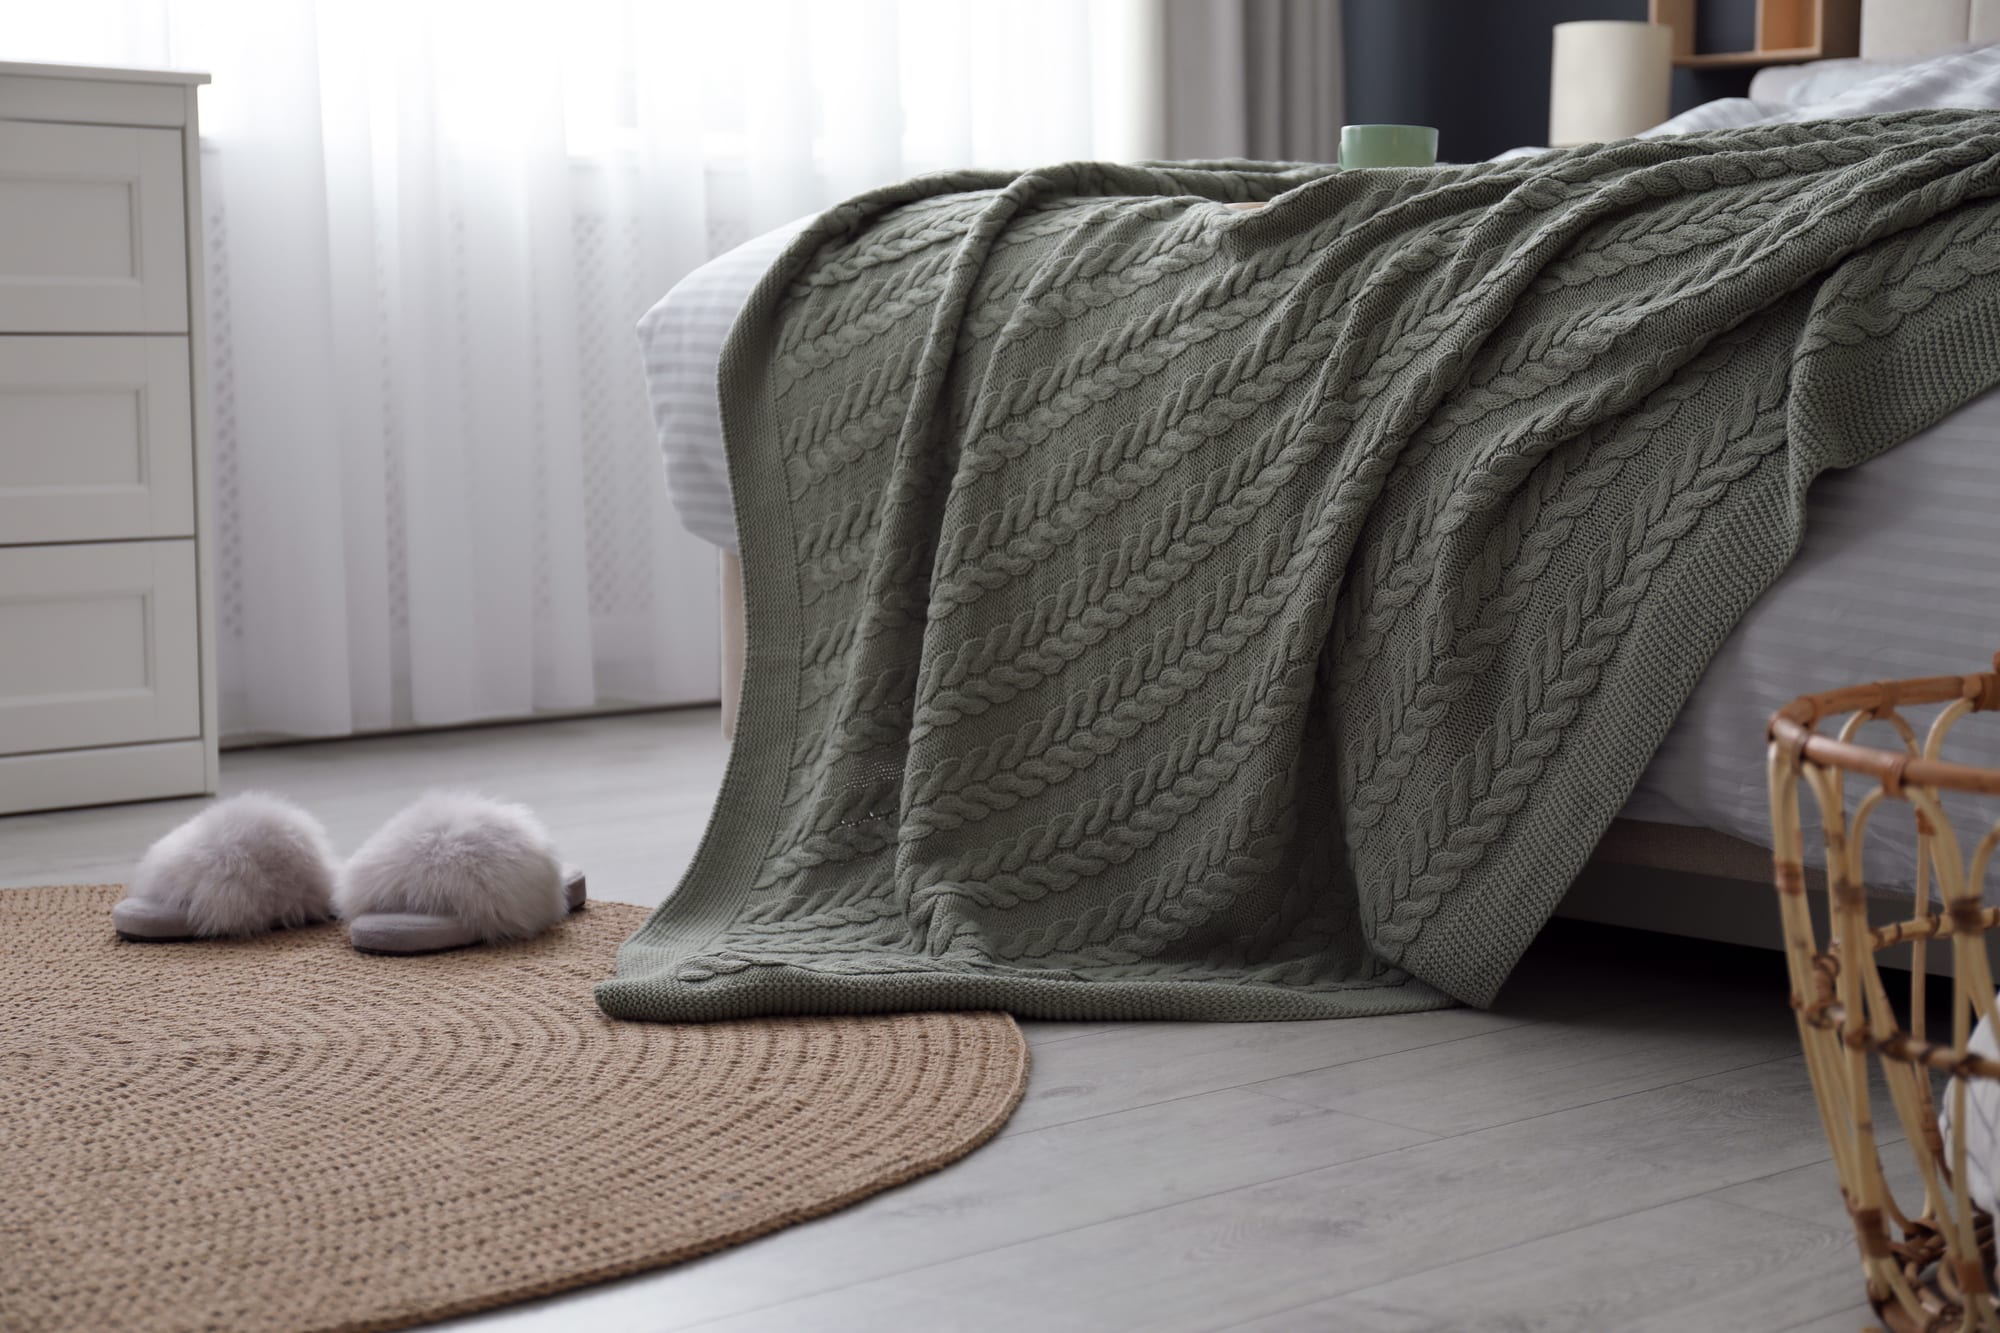 The 12 Best Throw Blankets To Stay Cozy This Winter | HomeIdeas